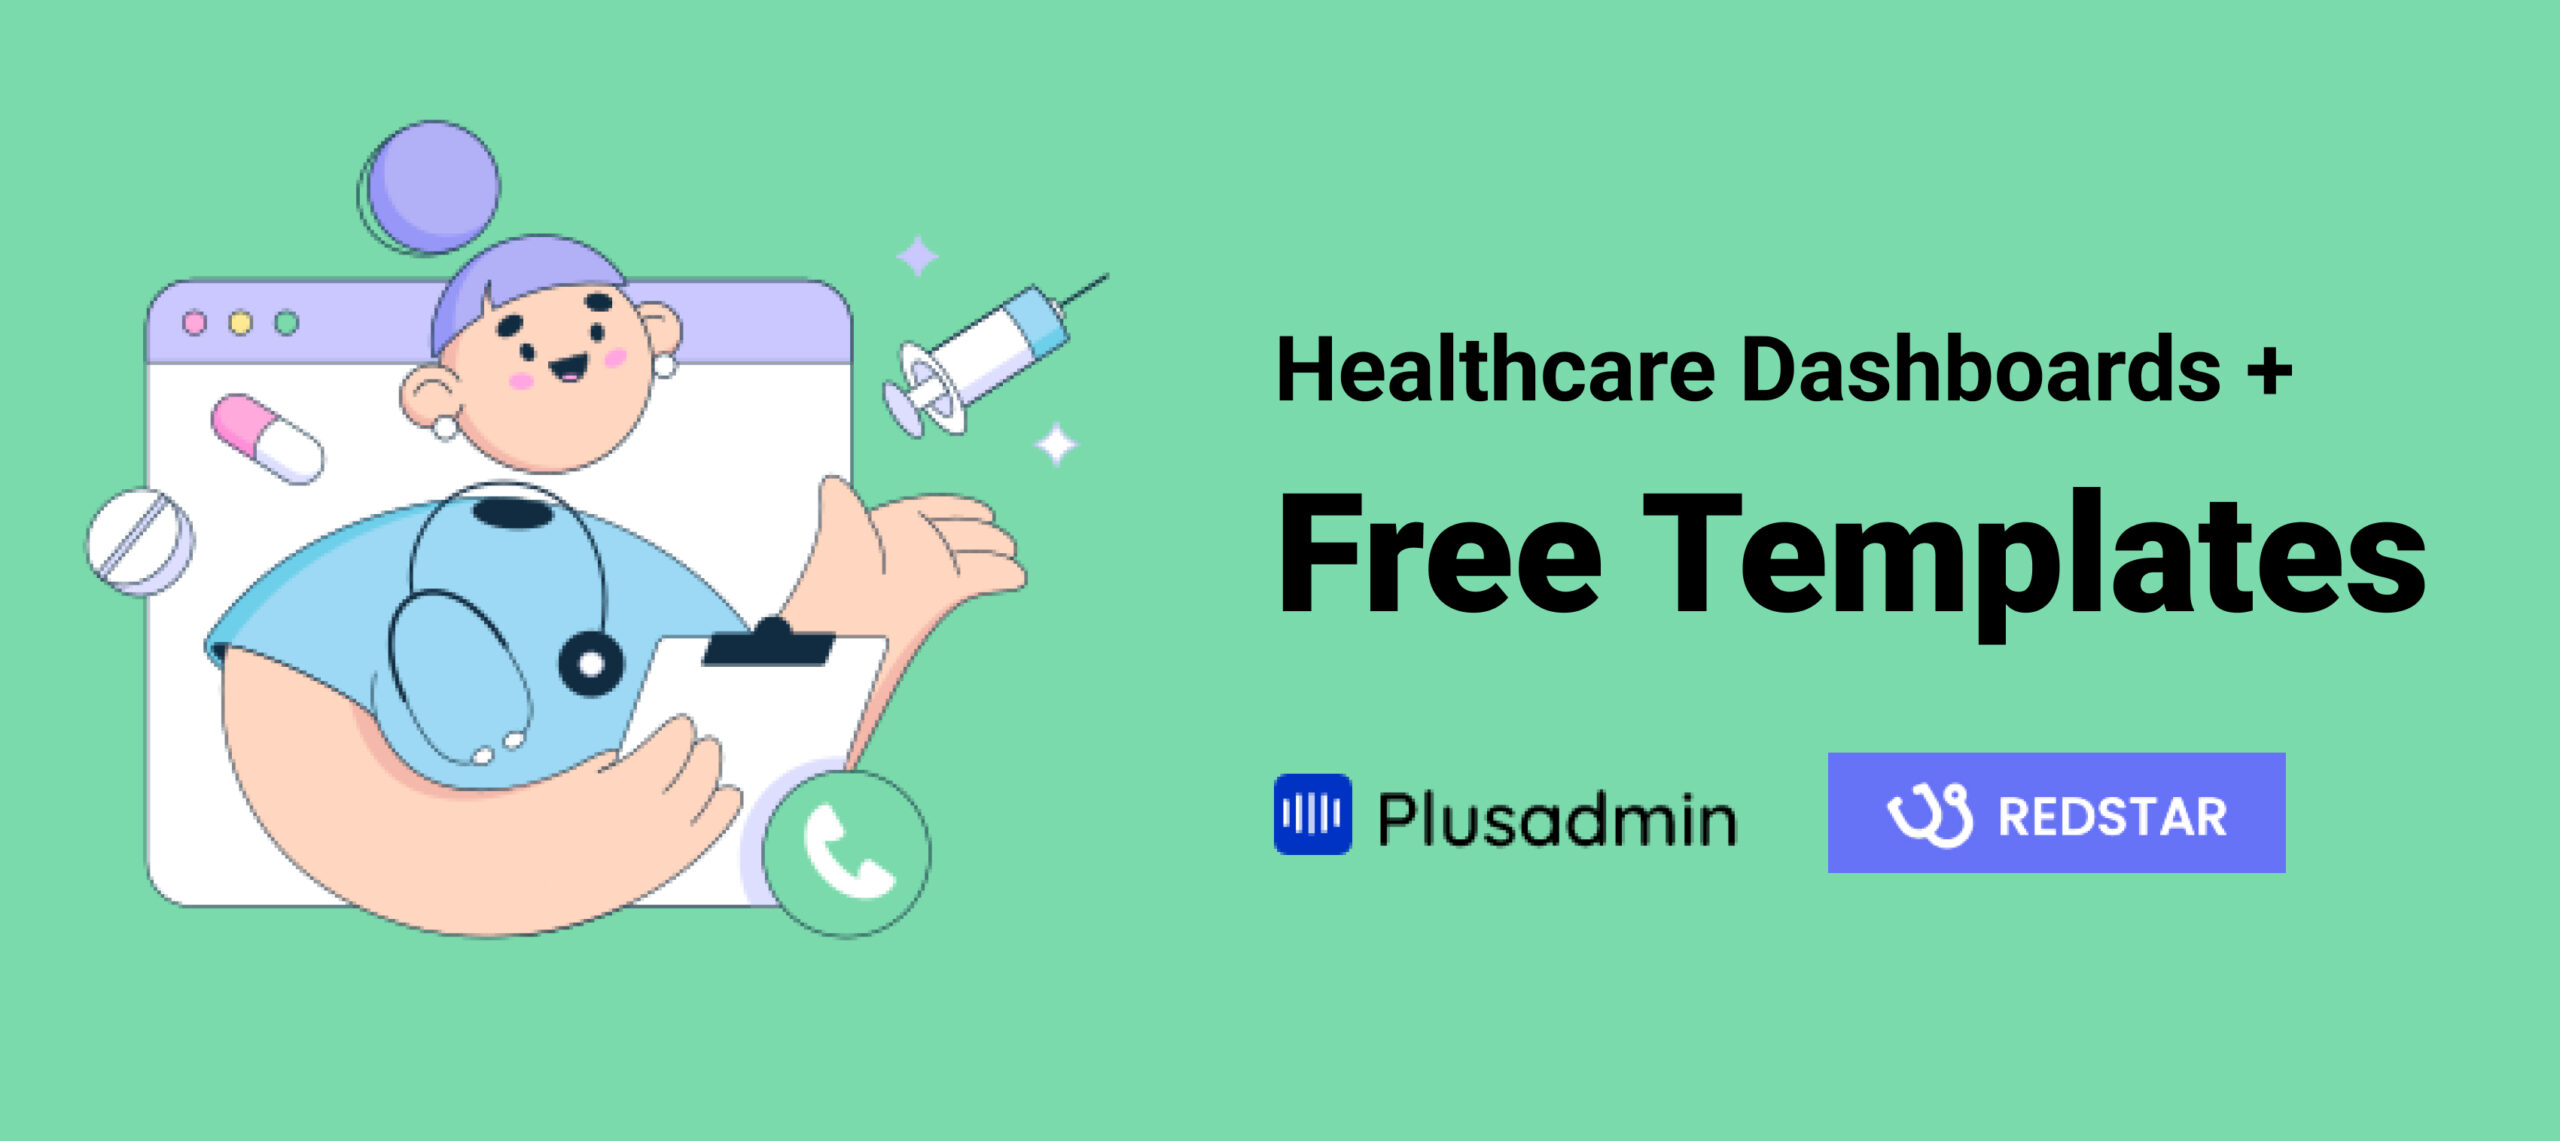  Guide to Healthcare Dashboards + Free Templates